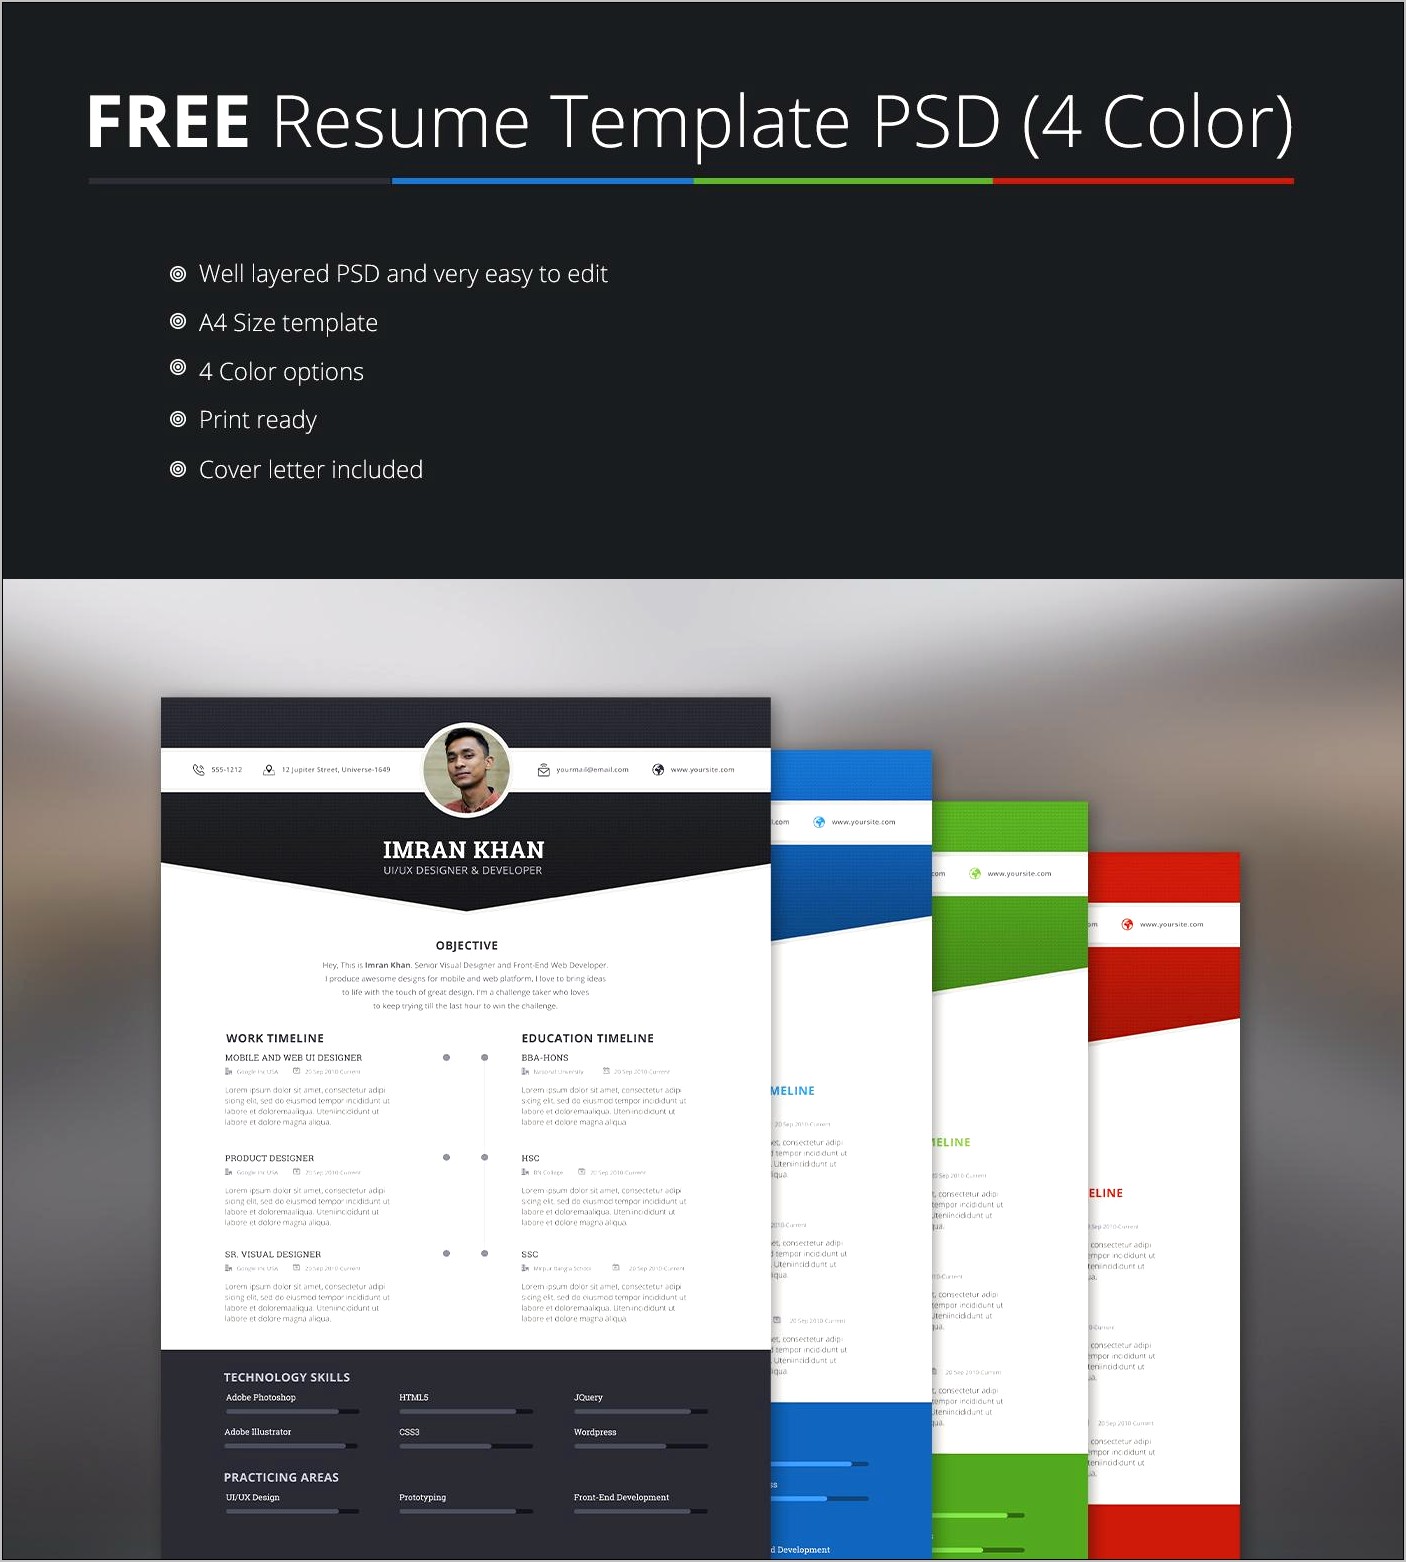 free-resume-template-psd-download-resume-example-gallery